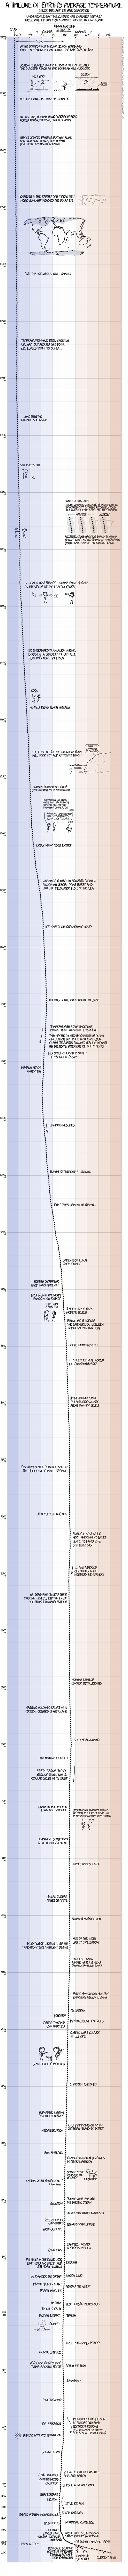 The Temperature Timeline Of Earth That All Climate Change Deniers Need To See...